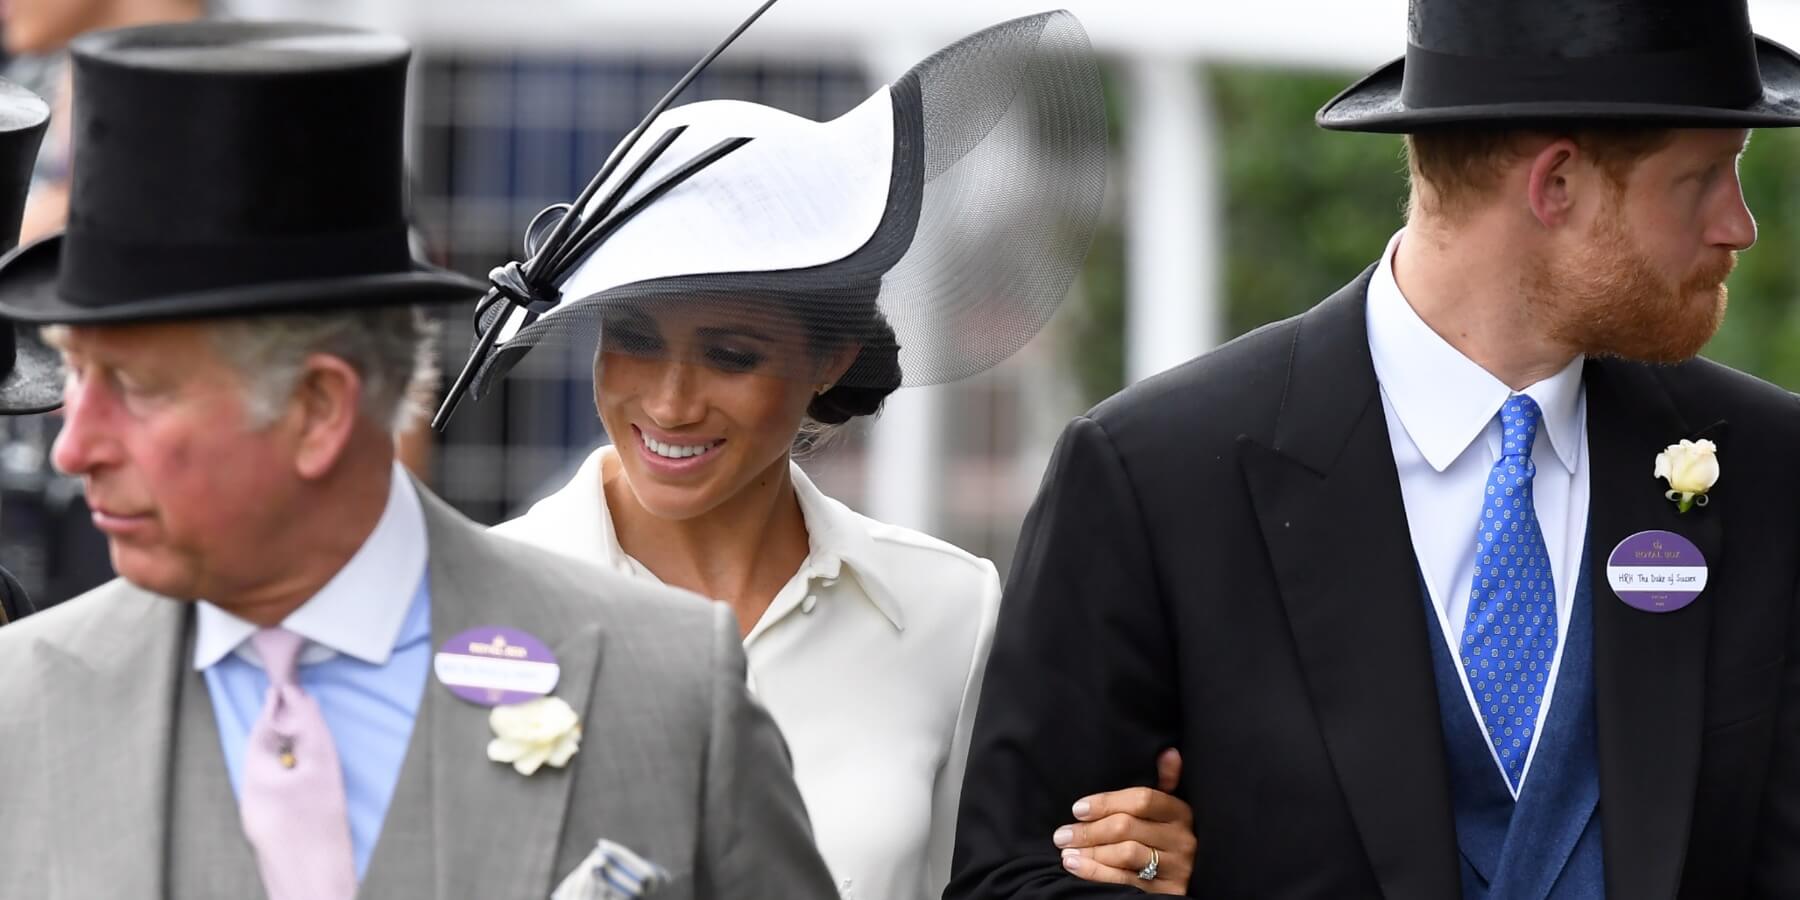 King Charles, Meghan Markle and Prince Harry at the first day of Royal Ascot on June 19, 2018 in Ascot, England.